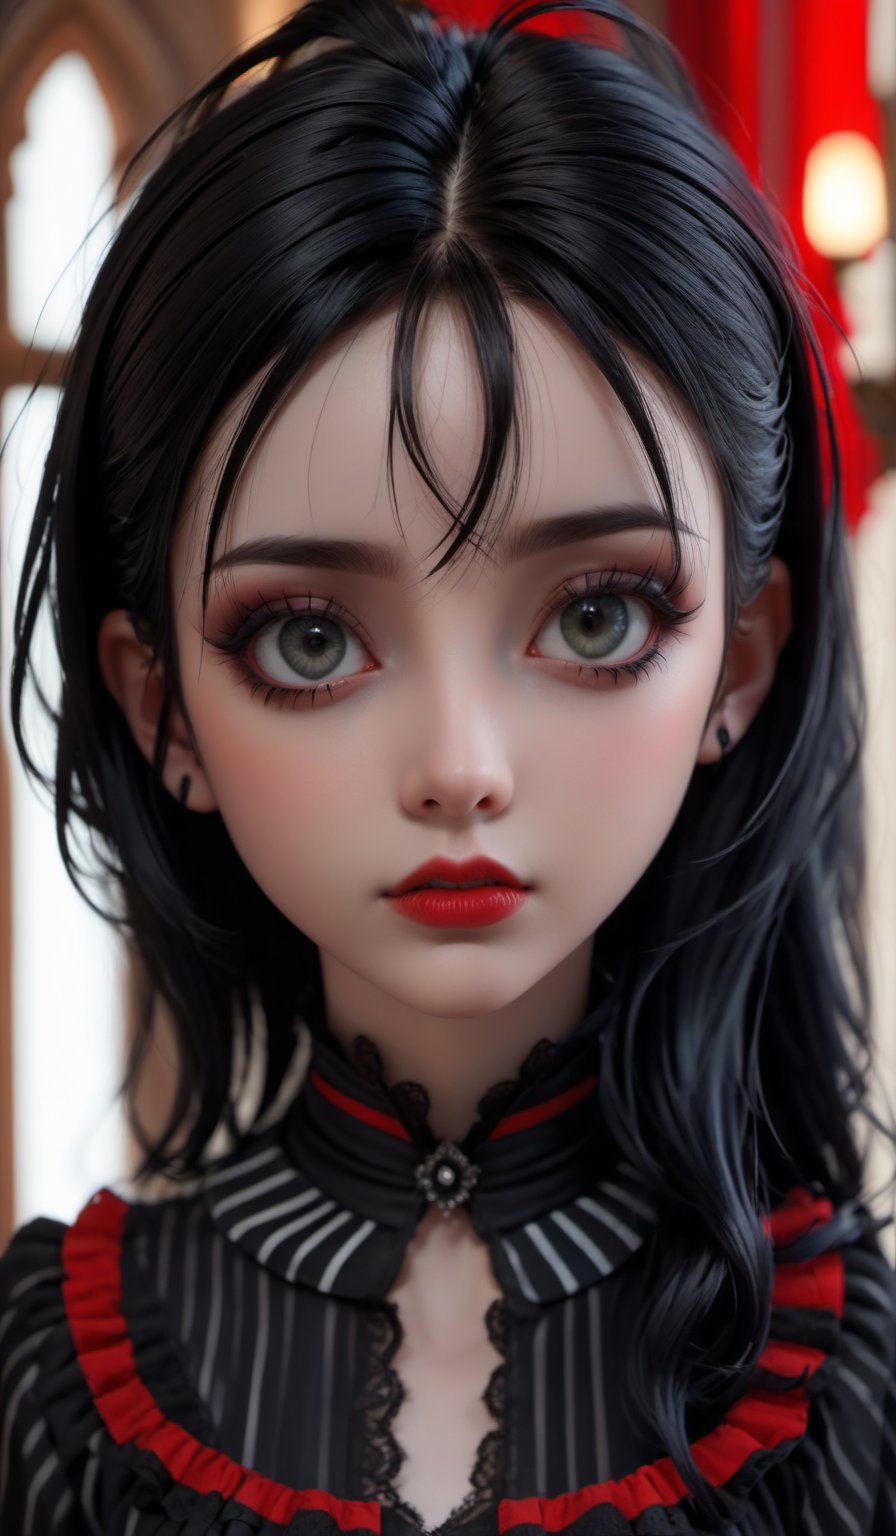 arafed woman with a black and red striped top and a black, upper body shot, 18 - year - old goth girl, goth girl, gothic horror vibes, goth vibe, goth girl aesthetic, pale goth beauty, grey eyes, 18 - year - old anime goth girl, goth aesthetic, dark goth queen, very beautiful goth top model, gothcore, goth woman
,midjourney,mansion, large-eyed ,3d toon style